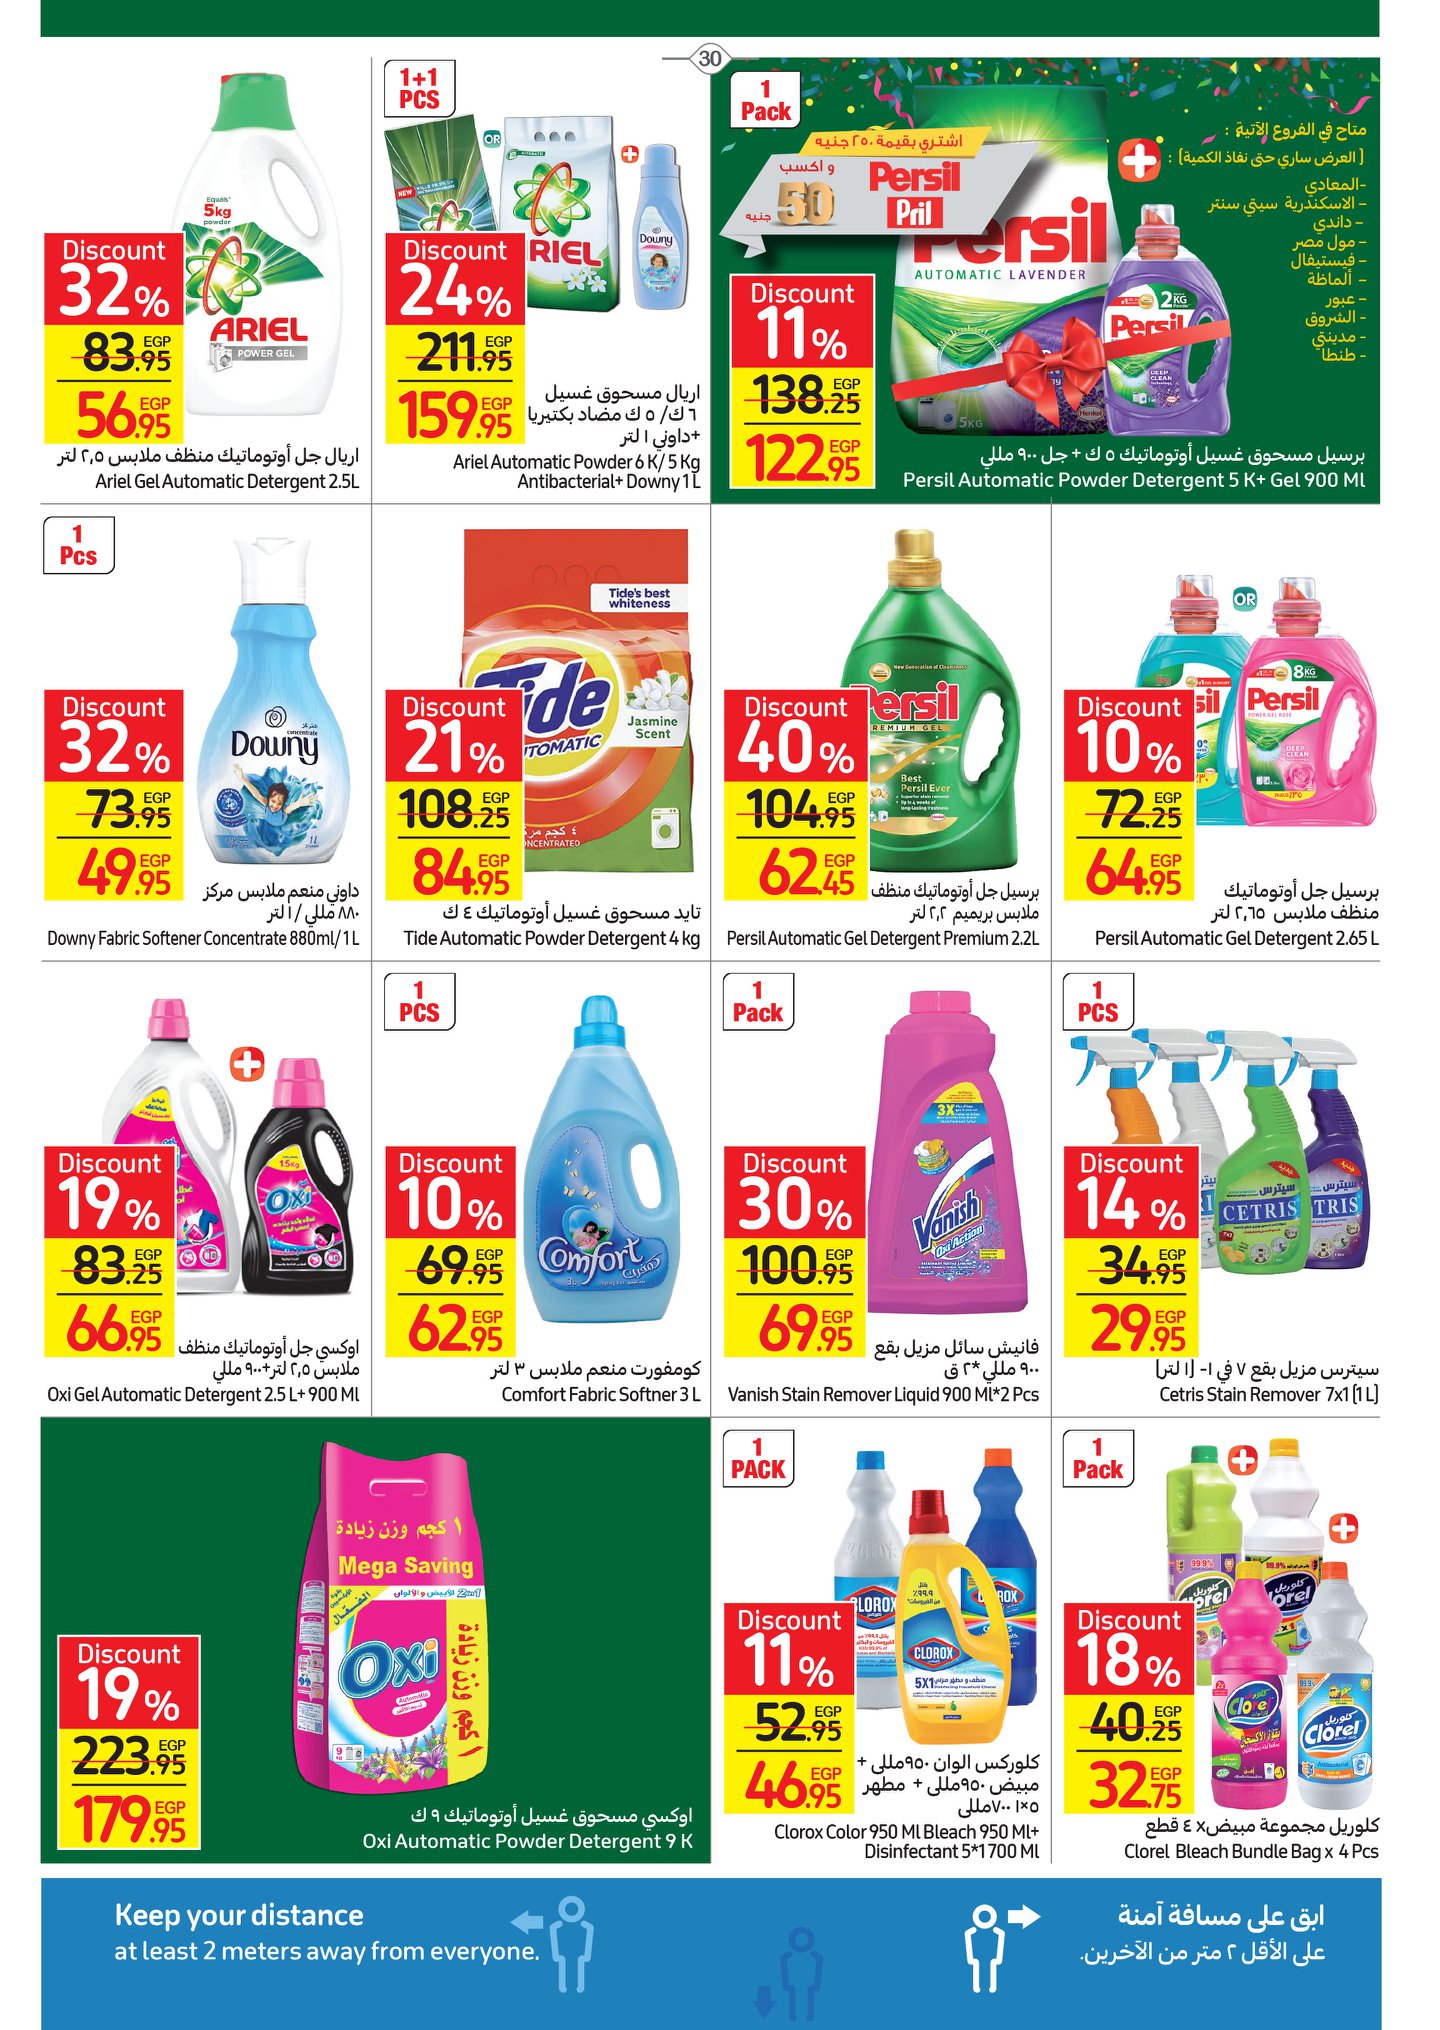 Carrefour magazine offers complete with 50% discounts and a surprise purchase in convenient installments without interest 35